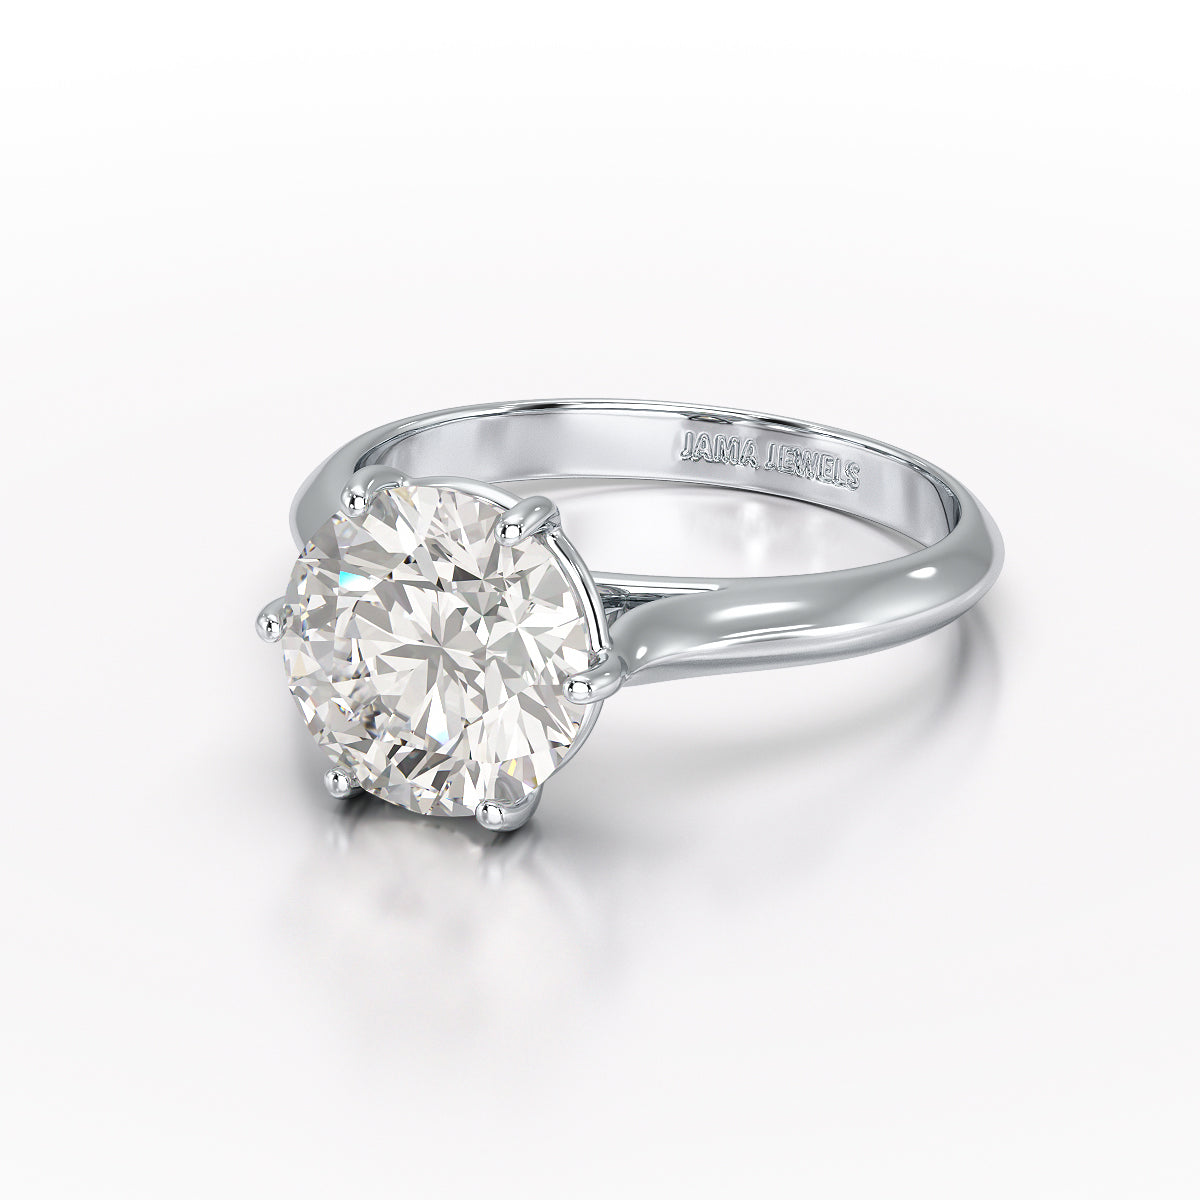 3.09 CT Diamond Solitaire Engagement Ring Lab Grown